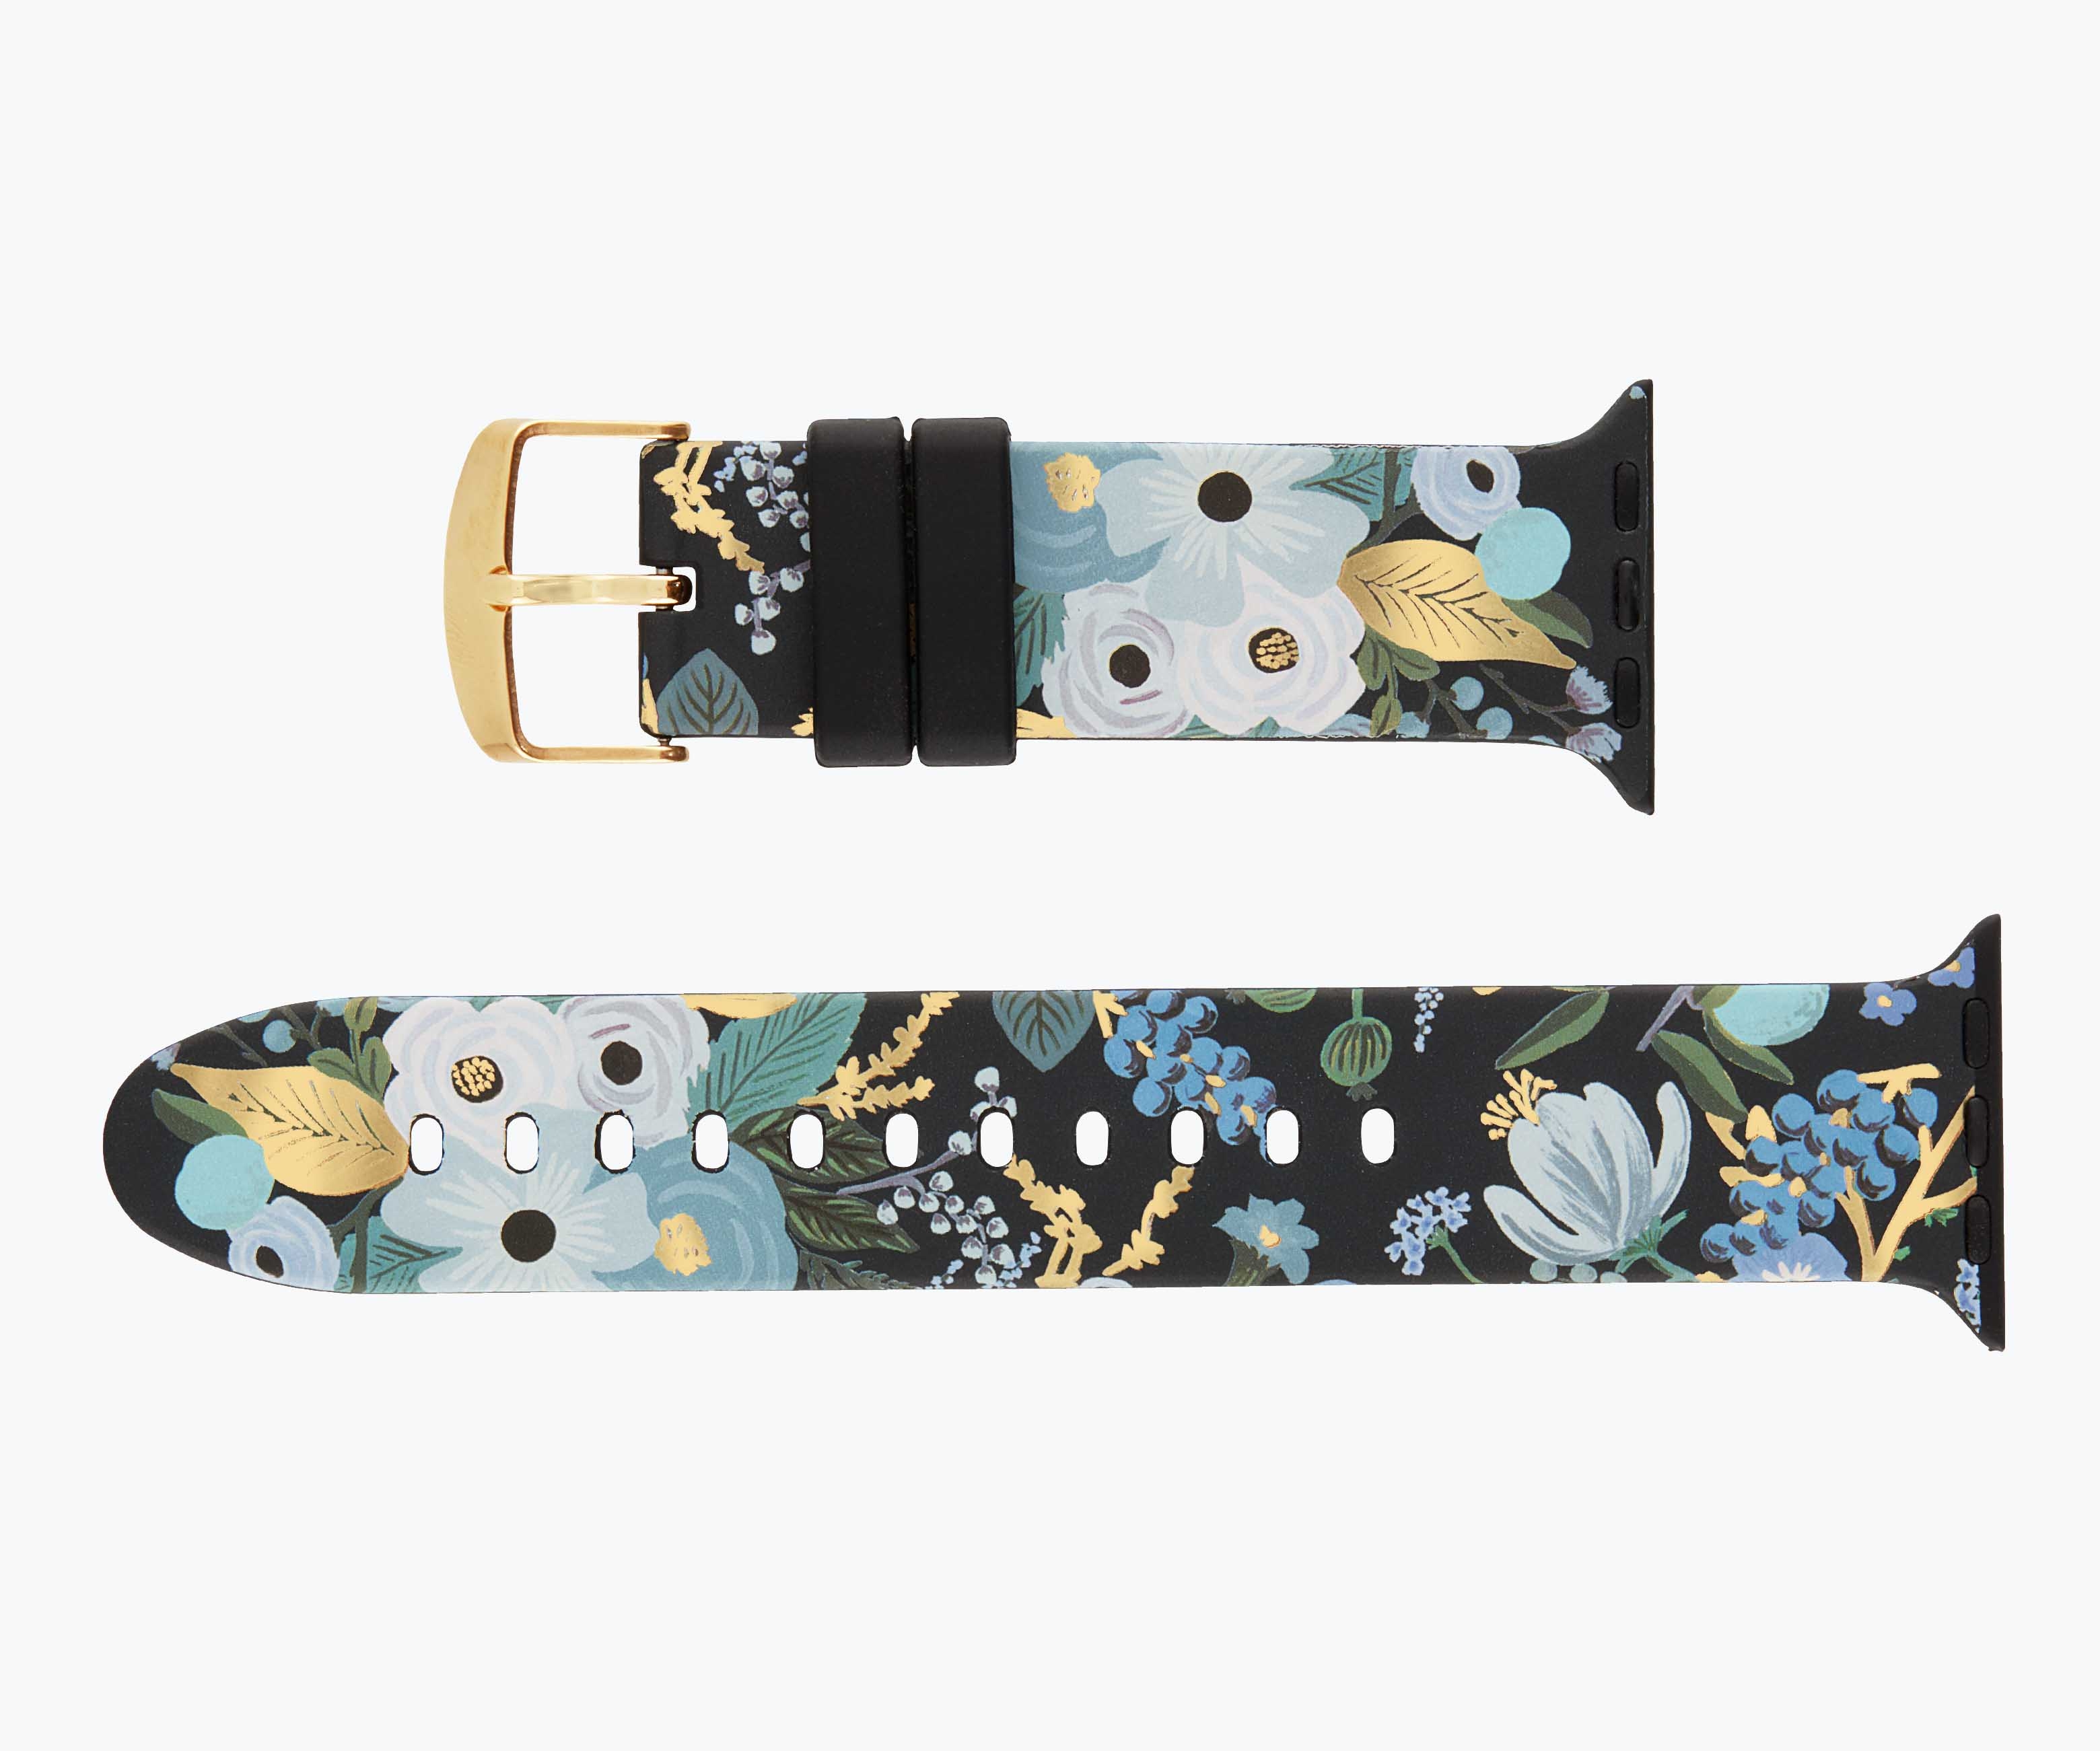 Rifle Paper Co. Garden Party Blue AirTag Clip Ring